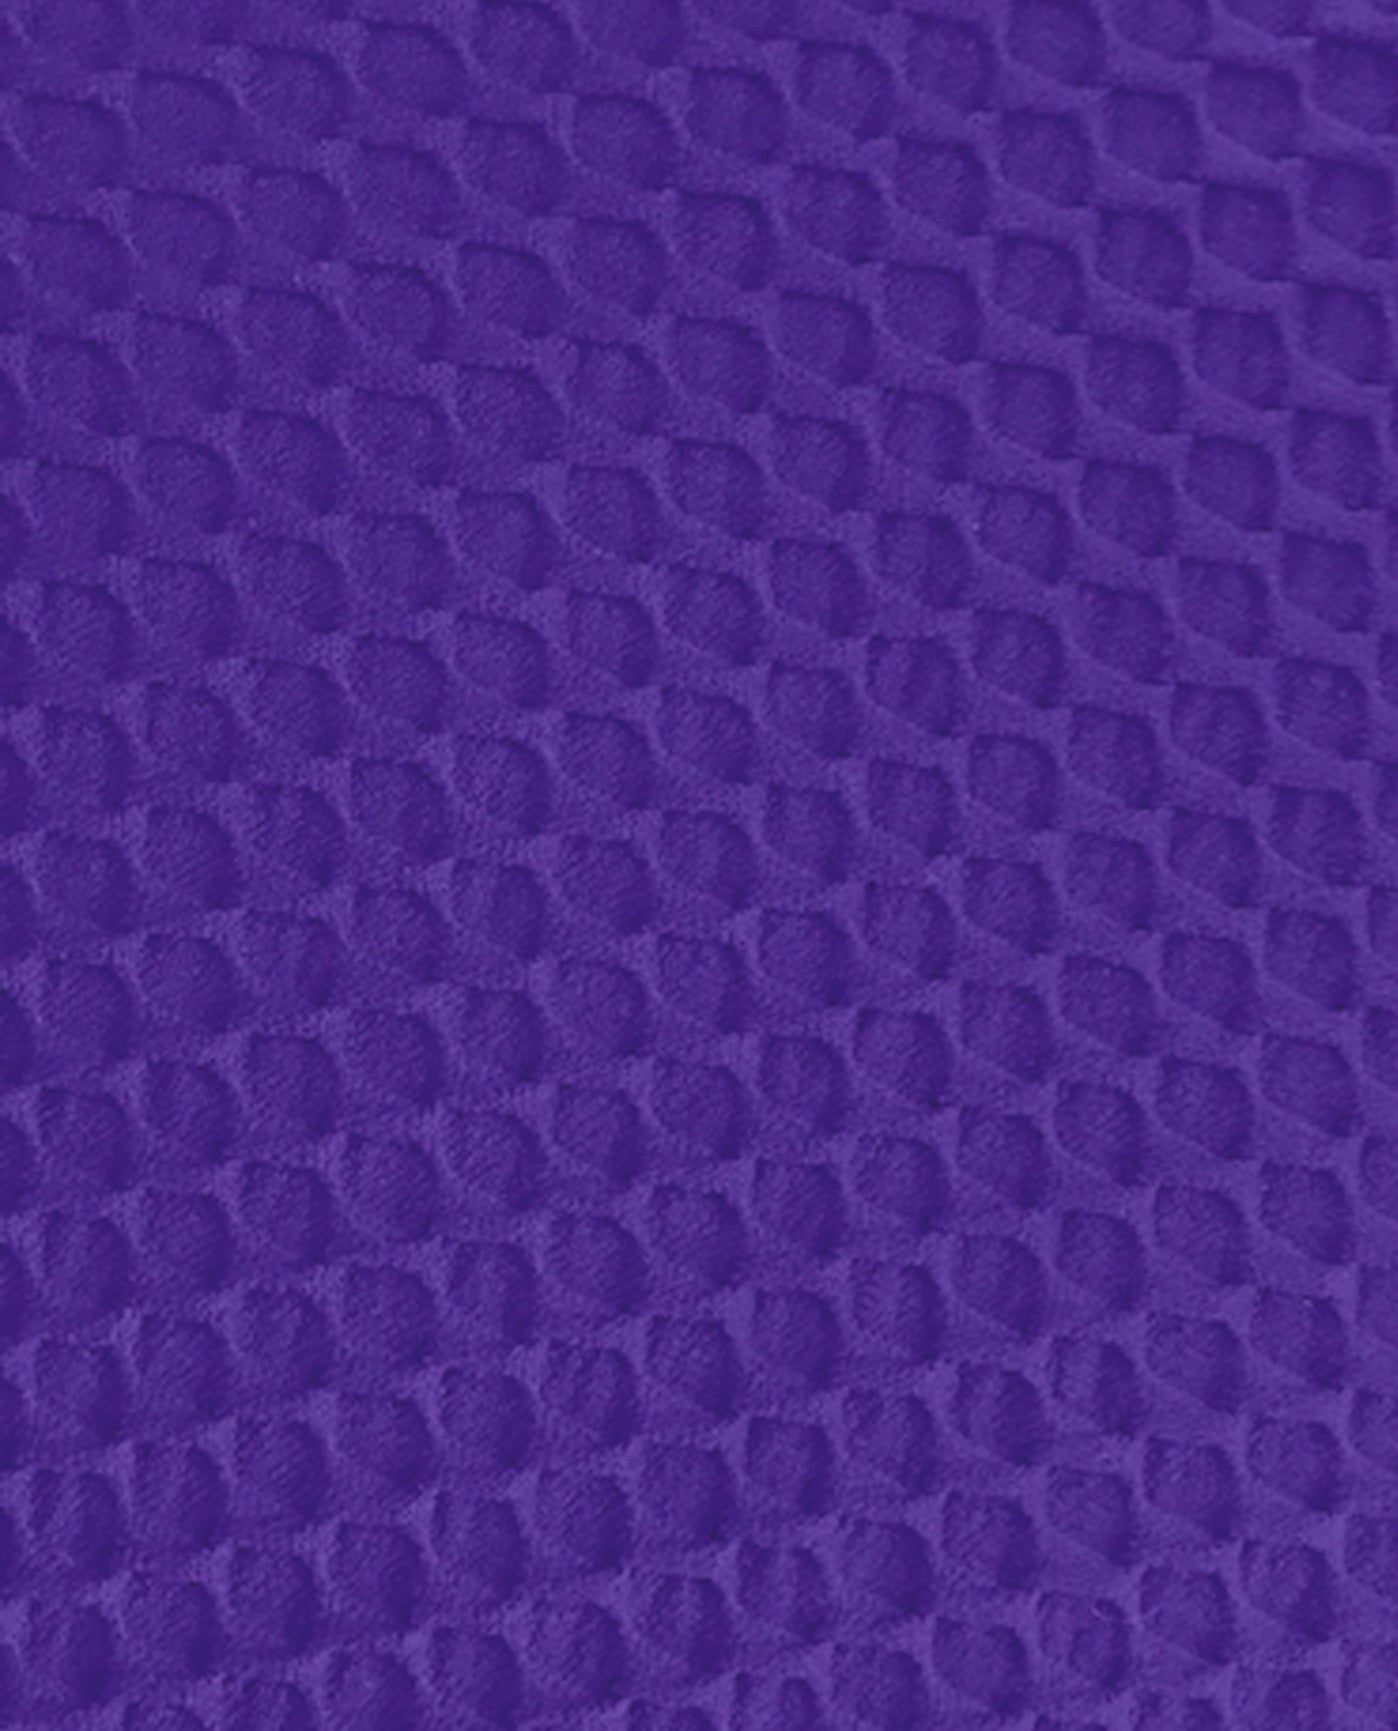 FABRIC SWATCH VIEW OF CHLORINE RESISTANT AQUAMORE SOLID TEXTURED SCOOP NECK PLUS SIZE SWIMSUIT | 510 AQT TEXTURED PURPLE